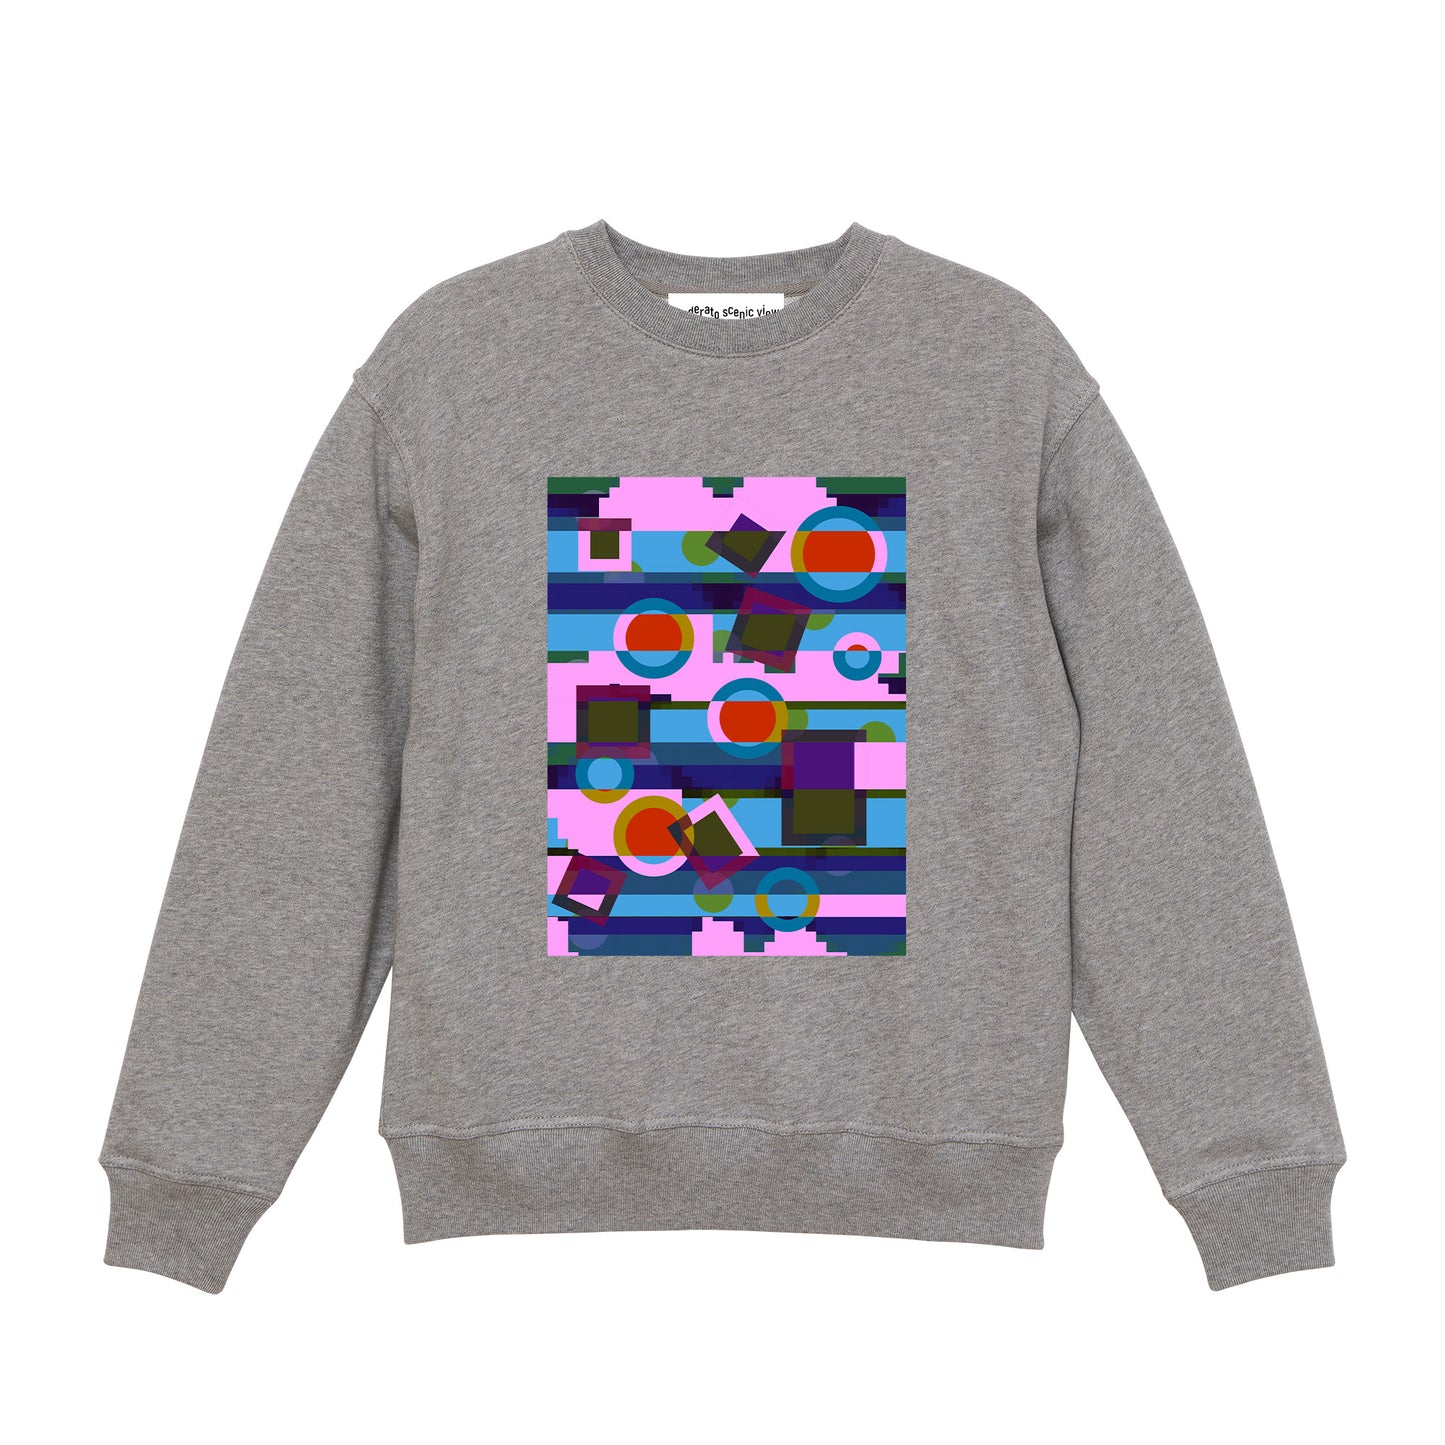 [moderato scenic view] Sweat Shirts [feis never hill]